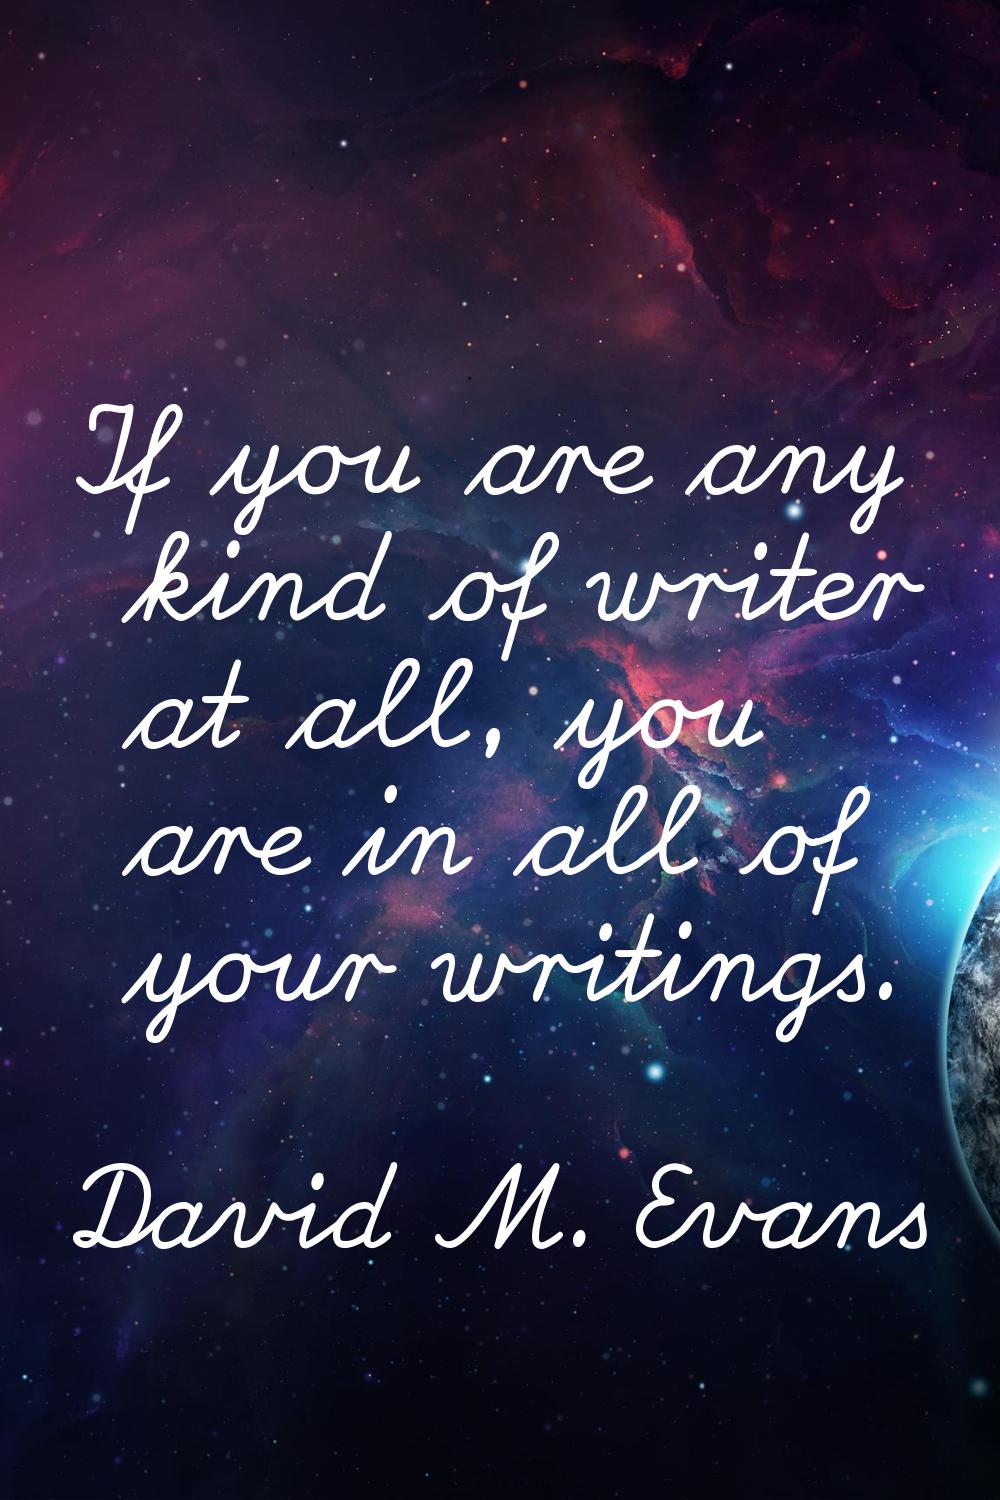 If you are any kind of writer at all, you are in all of your writings.